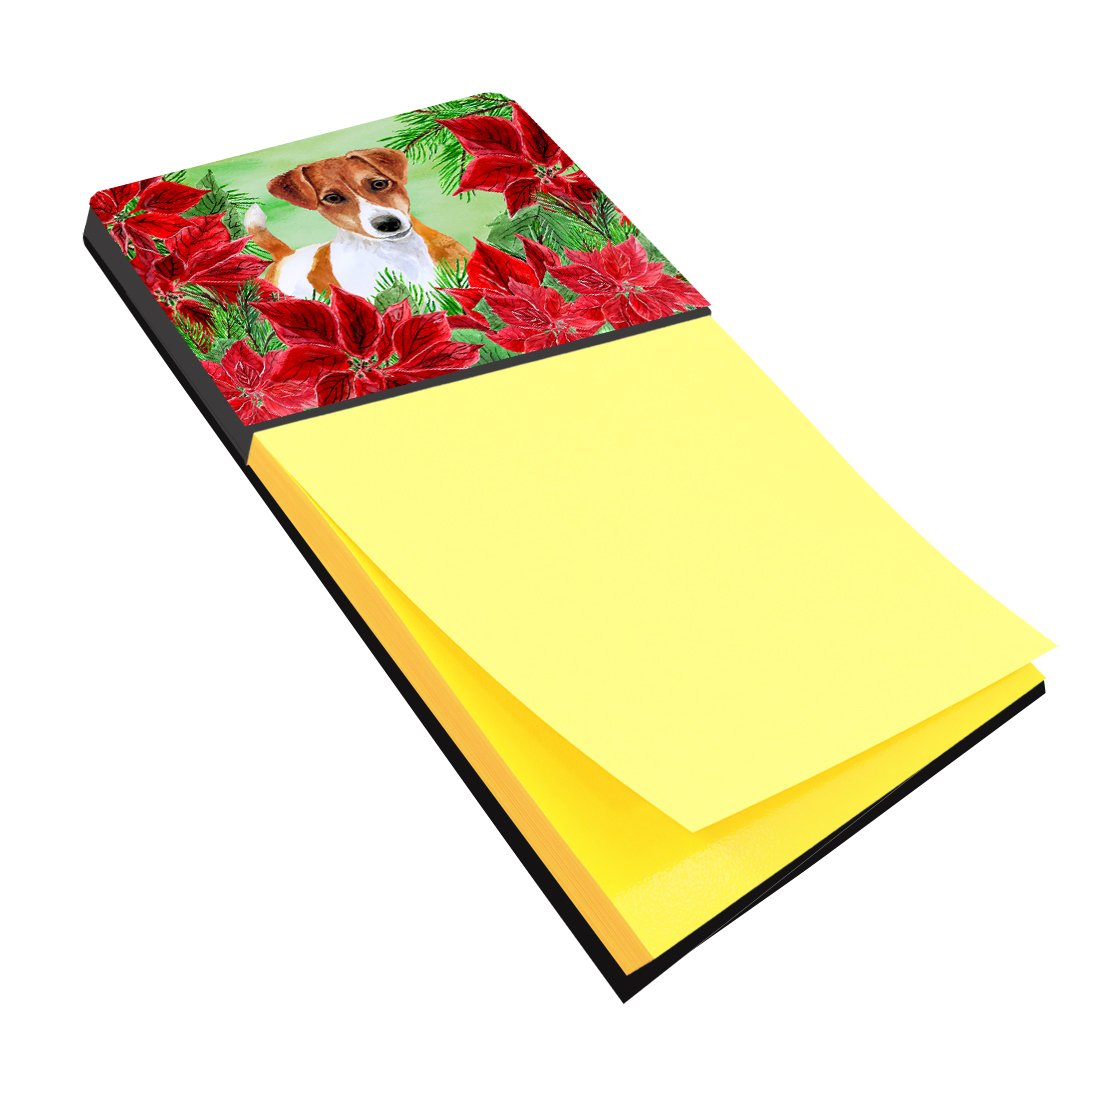 Jack Russell Terrier Poinsettas Sticky Note Holder CK1337SN by Caroline's Treasures